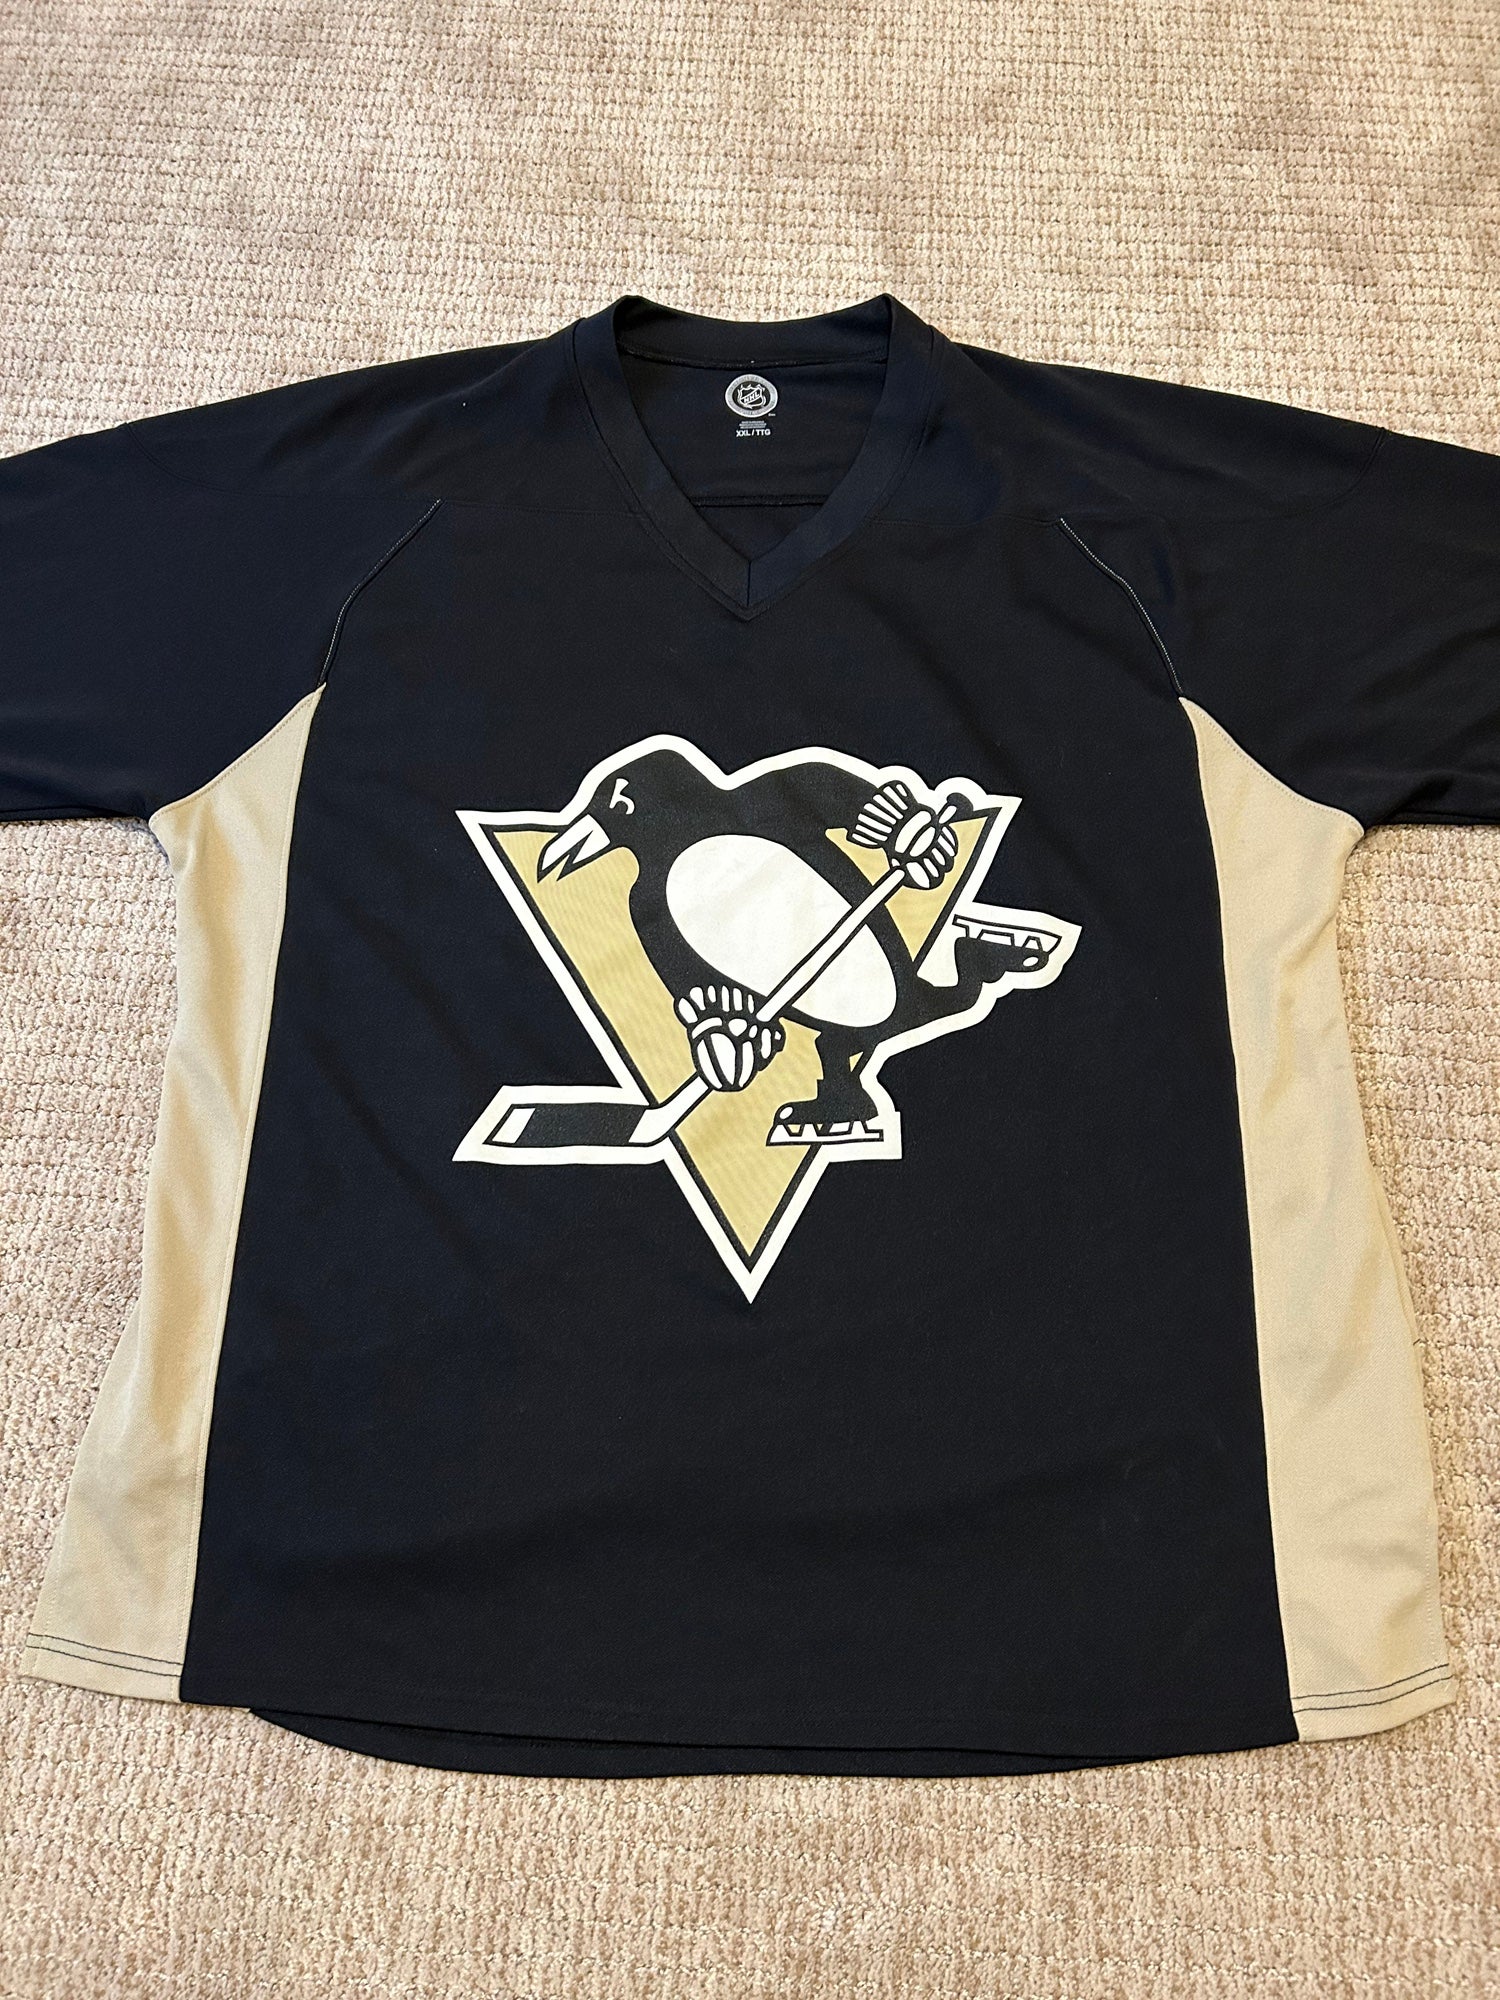 NWT Pittsburgh Penguins Men's Fanatics Jersey Crosby, Dumoulin, Or Cole